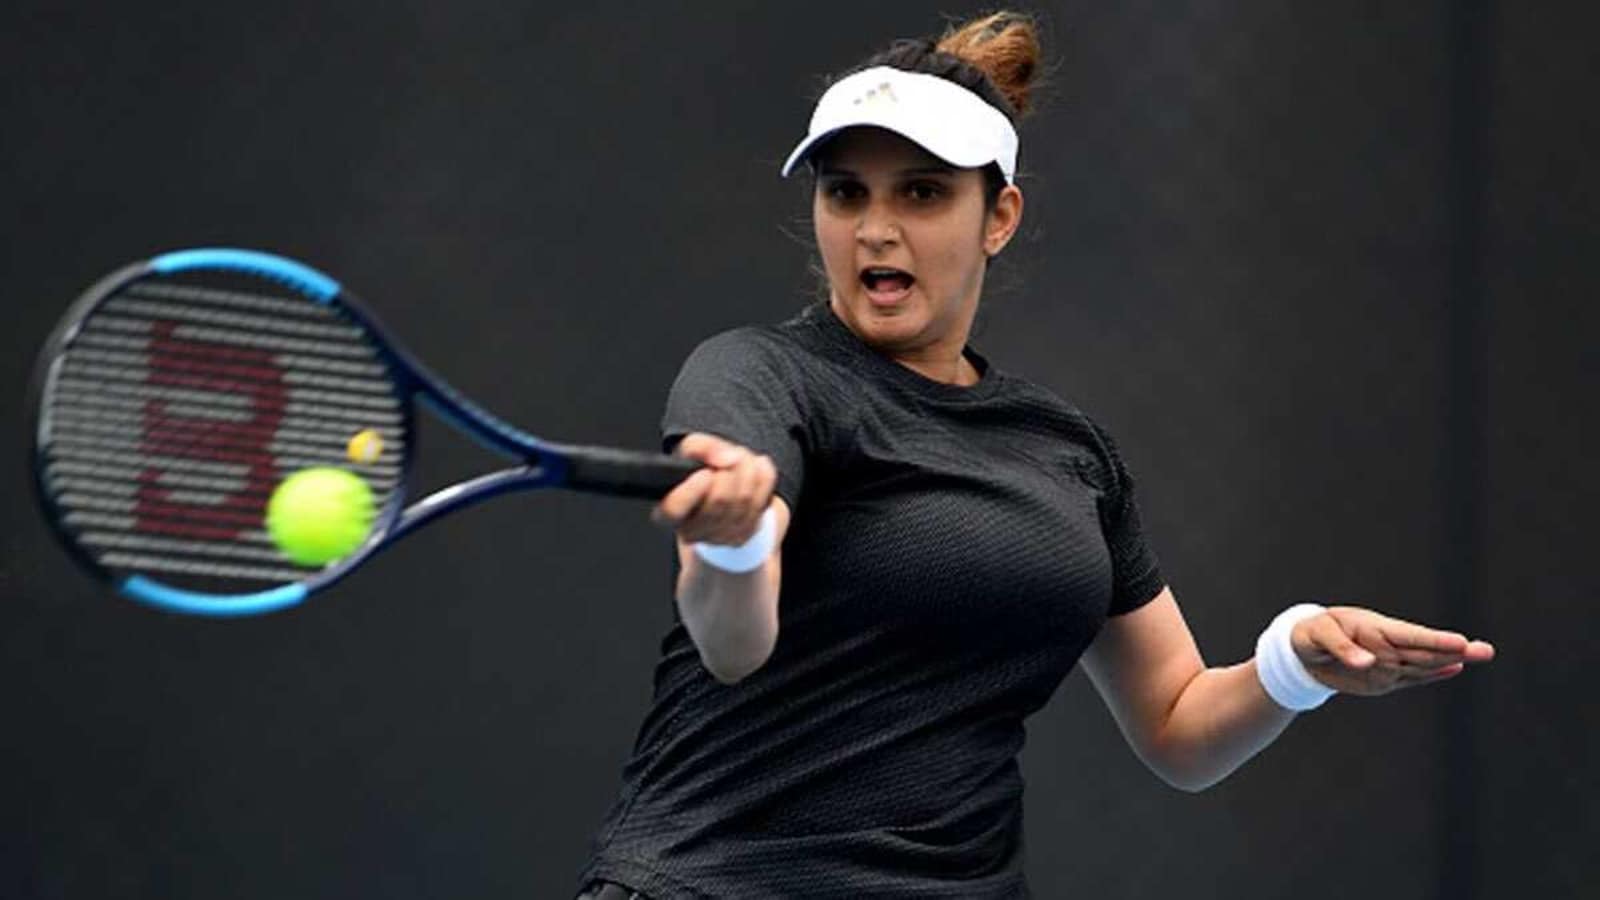 Australian Open 2022 | Sania Mirza and Rajeev Ram lose quarters match, India's campaign ends